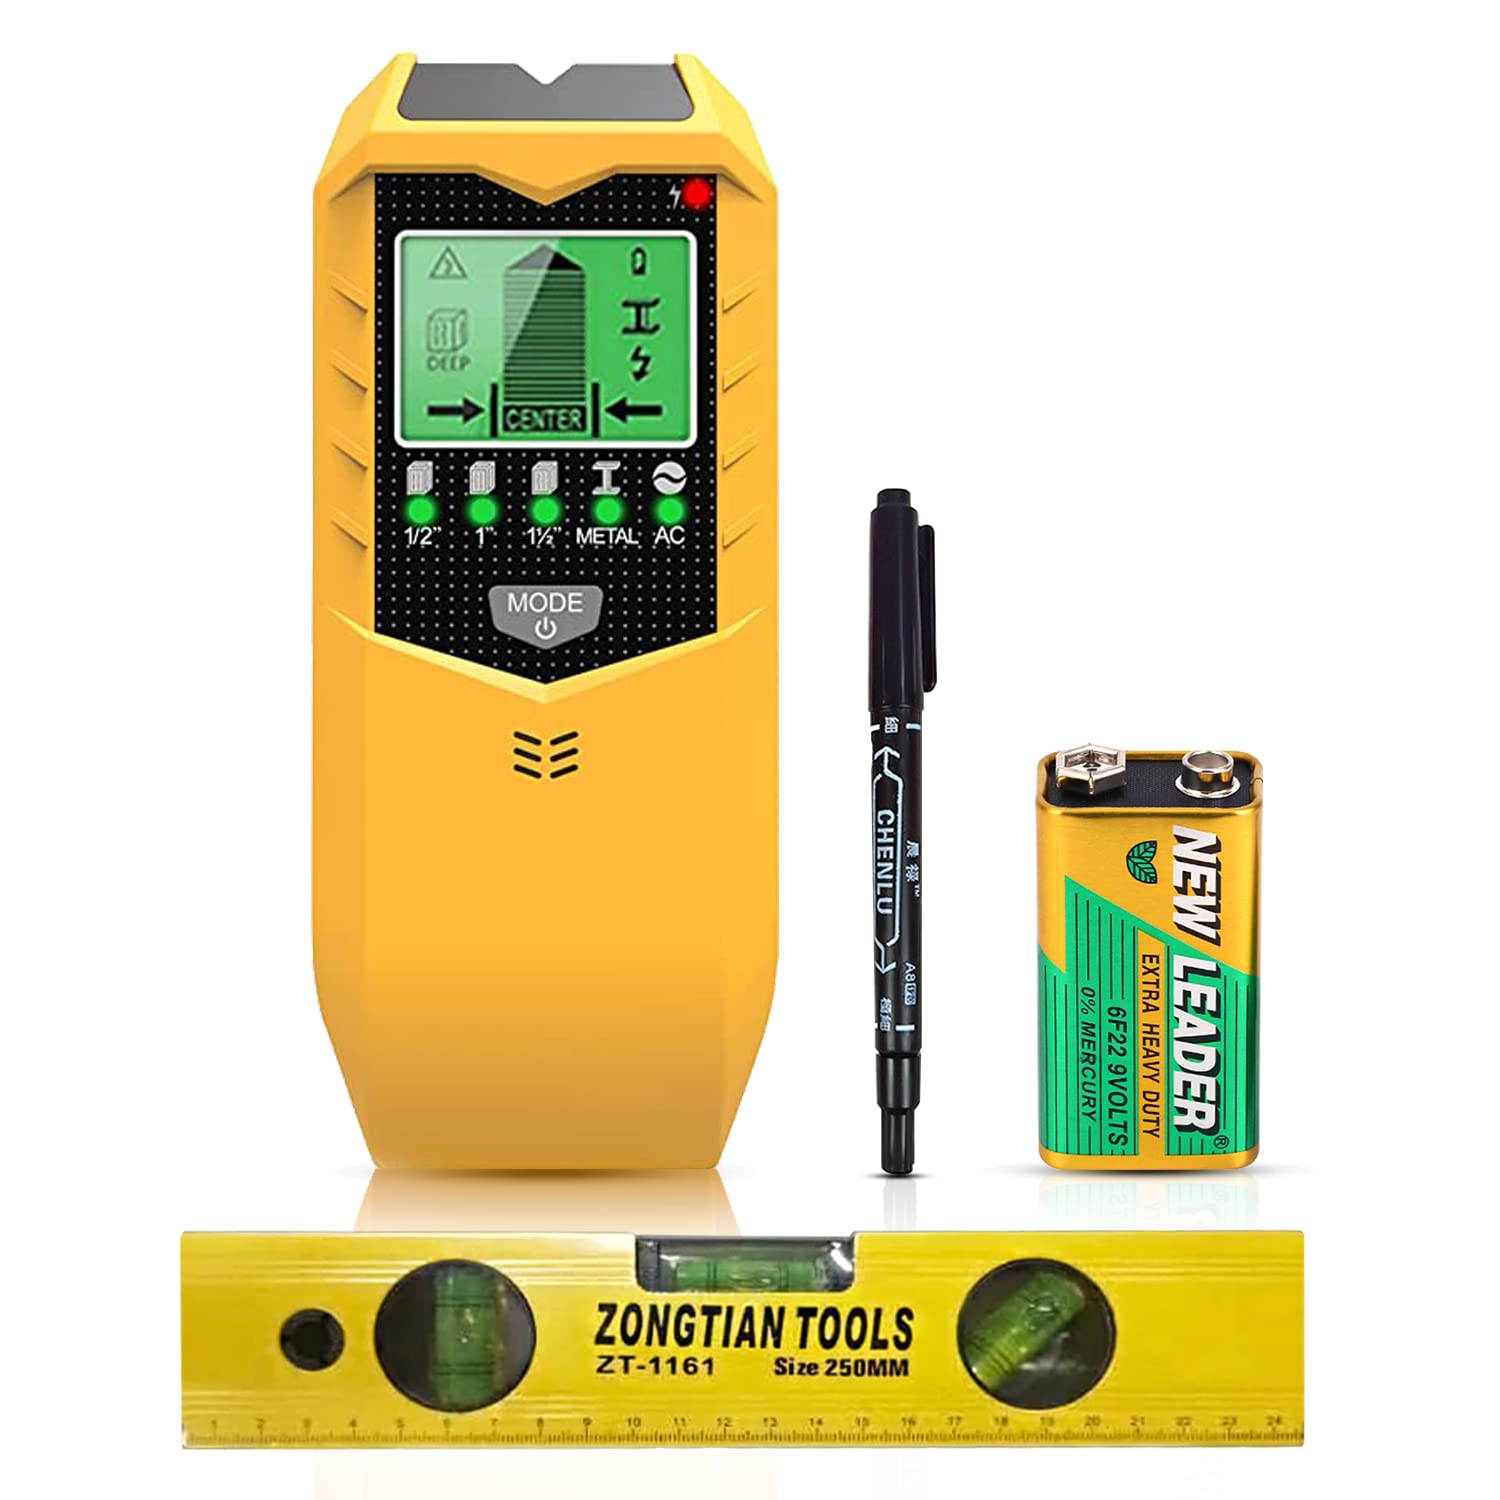 Stud Finder Wall Scanner 5 in 1 Upgraded Electronic Wall Scanner with Intelligent Microprocessor Chip,Batteries, Spirit Level Wood Metal and AC Wire Detection, HD LCD Display and Audio Alarm (Yellow)